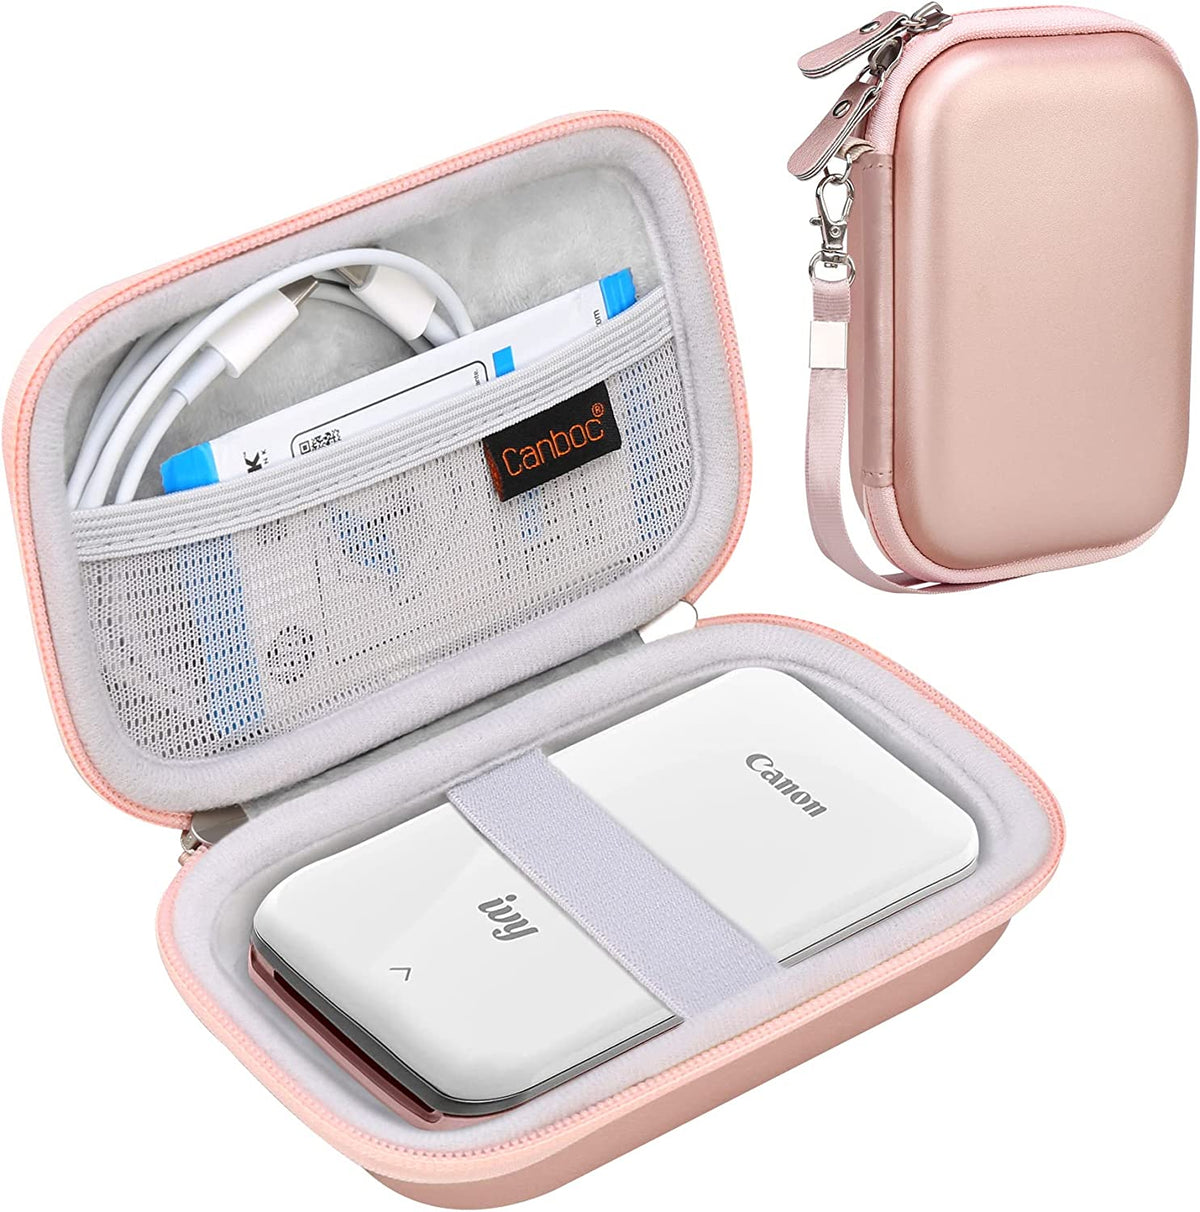 Hard Case for New Canon Ivy 2 Mini/Canon Ivy Mini/Canon Ivy CLIQ+2 CLIQ 2 CLIQ+ Photo Printer Mobile Wireless Bluetooth Instant Camera Printer, Mesh Bag Fit Photo Paper and Cable, Rose Gold